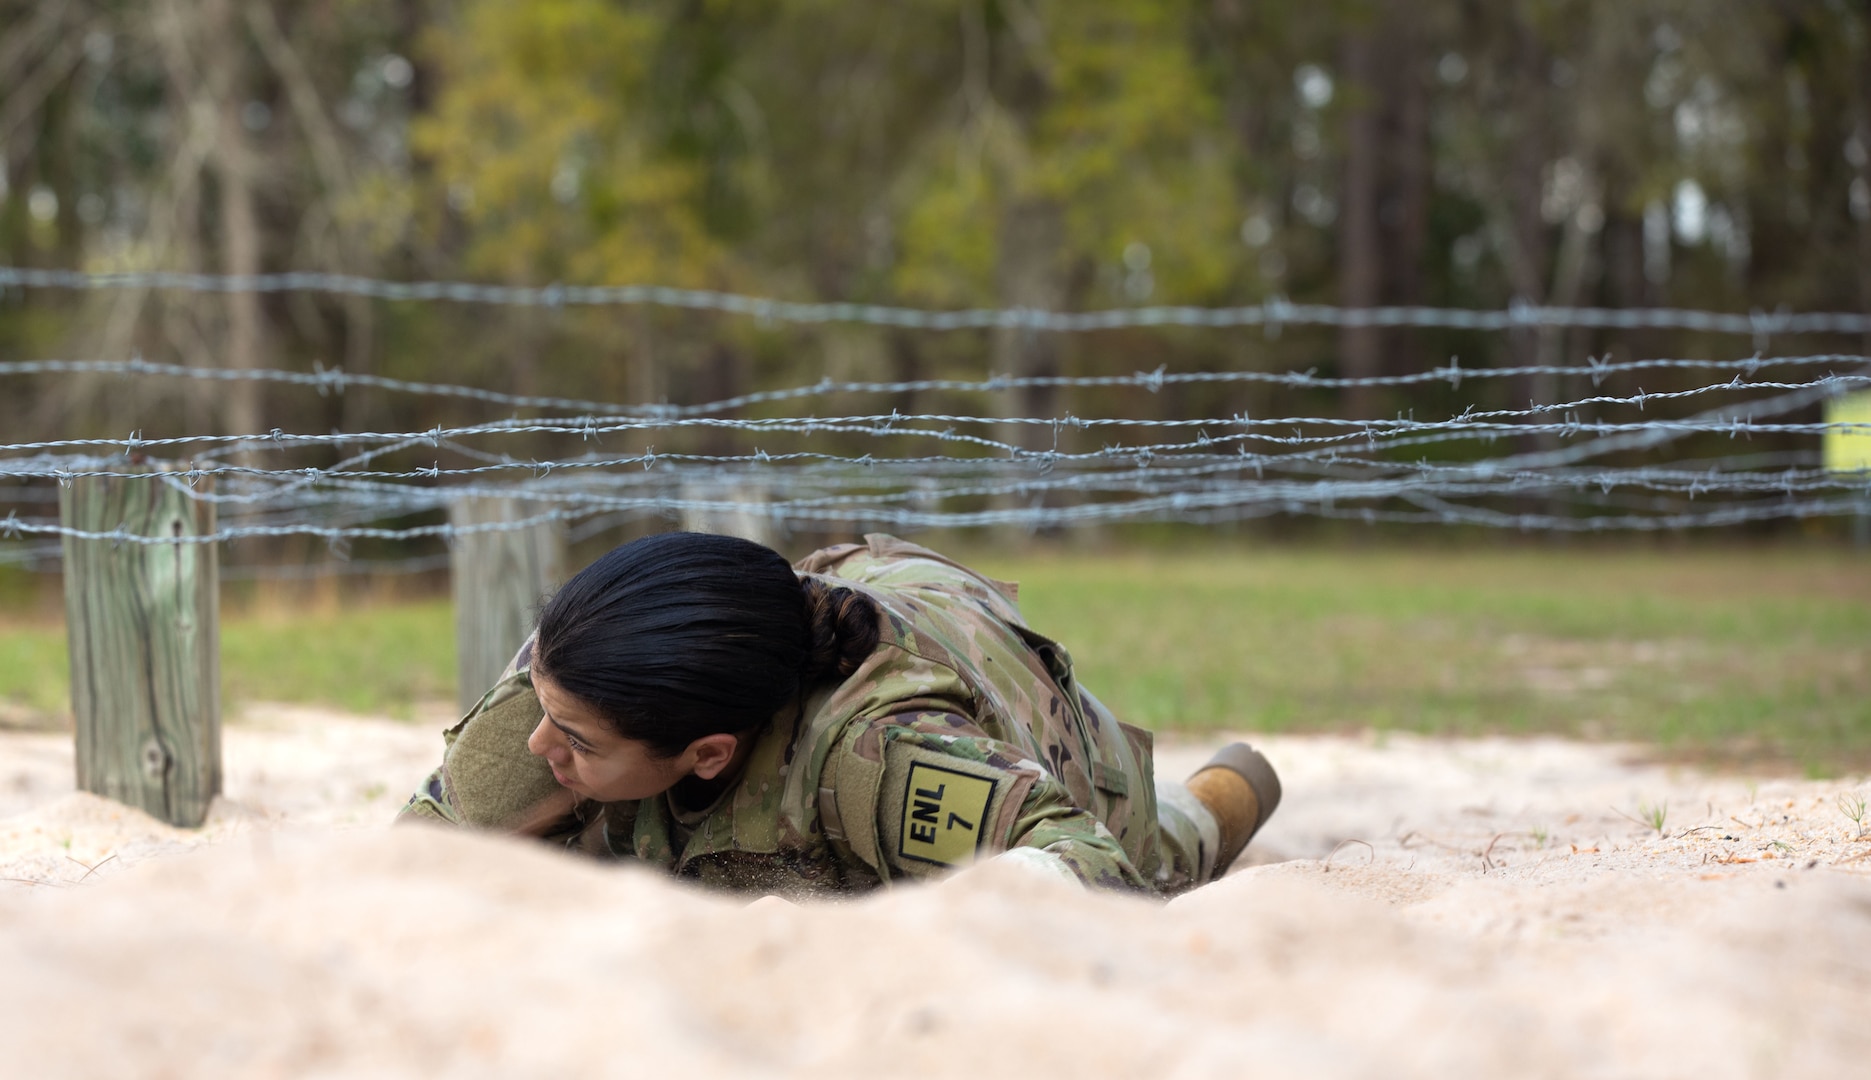 U.S. Army Spc. Mary Ruiz, an aviation operations specialist representing the 78th Aviation Troop Command, crawls under barbed wire during the obstacle course portion of the 2023 Georgia National Guard State Best Warrior Competition at Fort Stewart, Georgia, March 6, 2023. The competition tested readiness and adaptiveness of Georgia's best Soldiers.